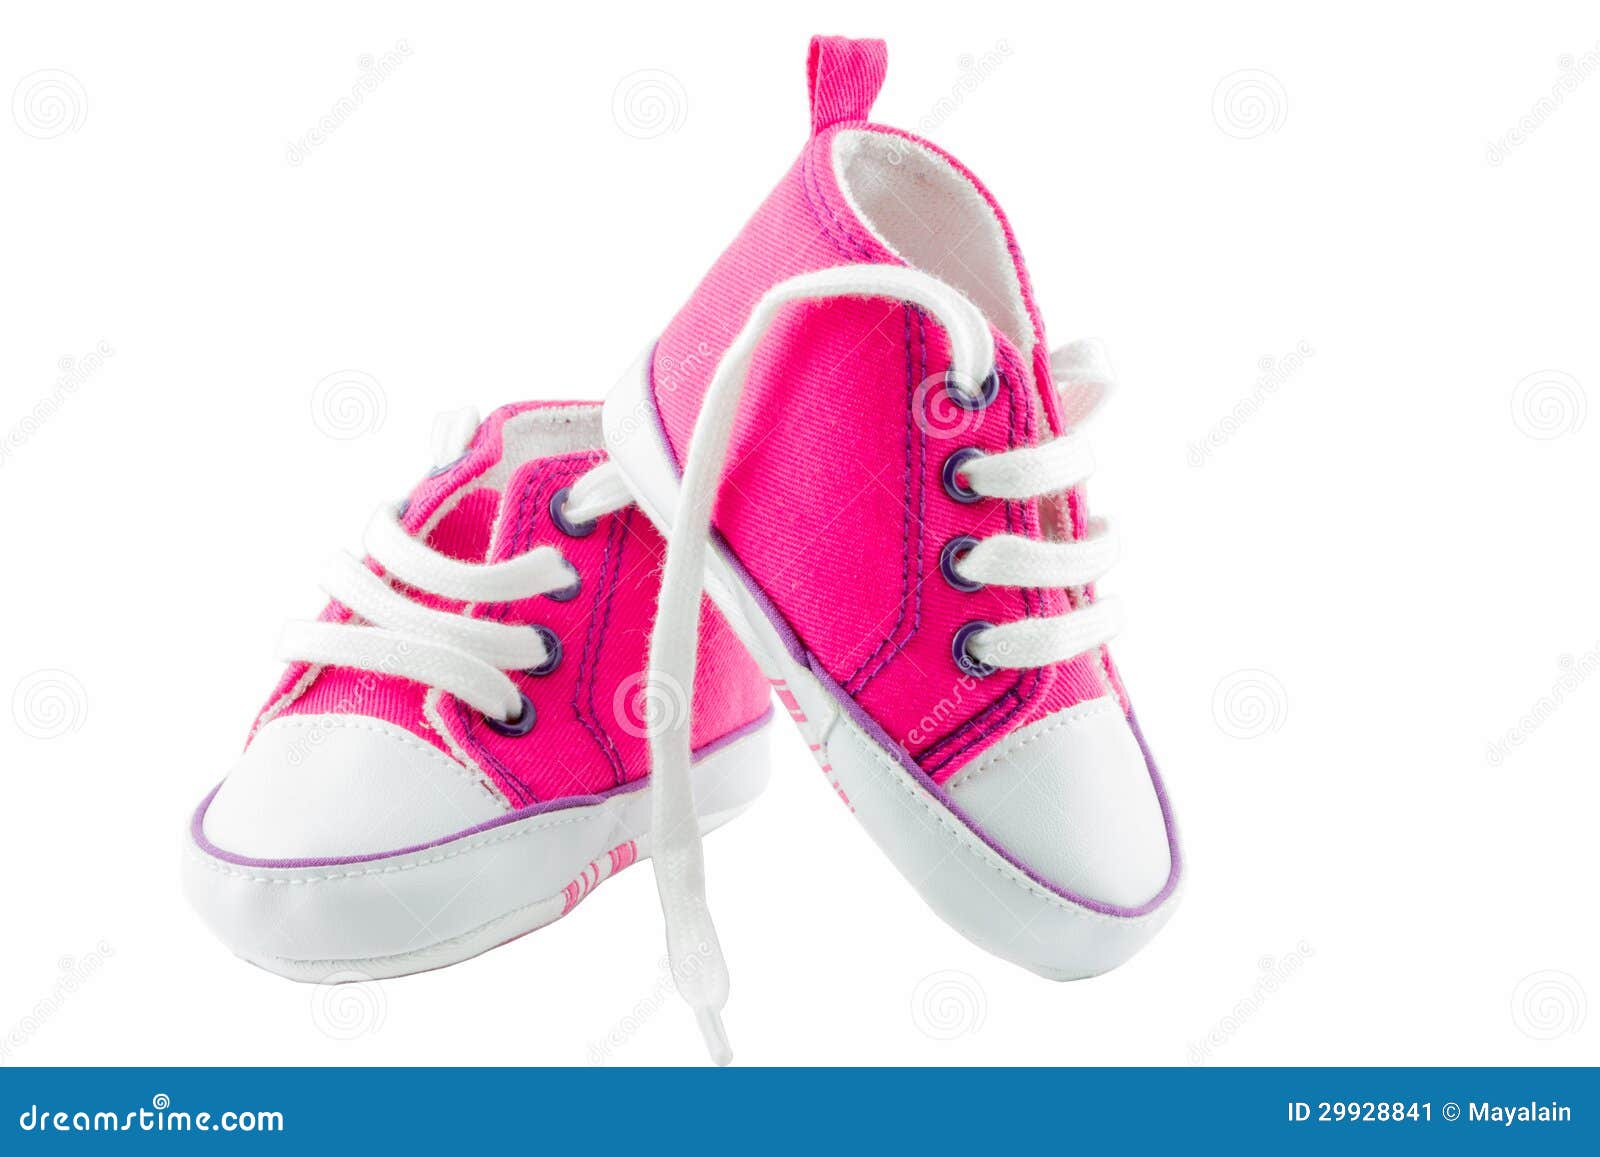 Pink baby shoes stock image. Image of baby, closeup, sport - 29928841